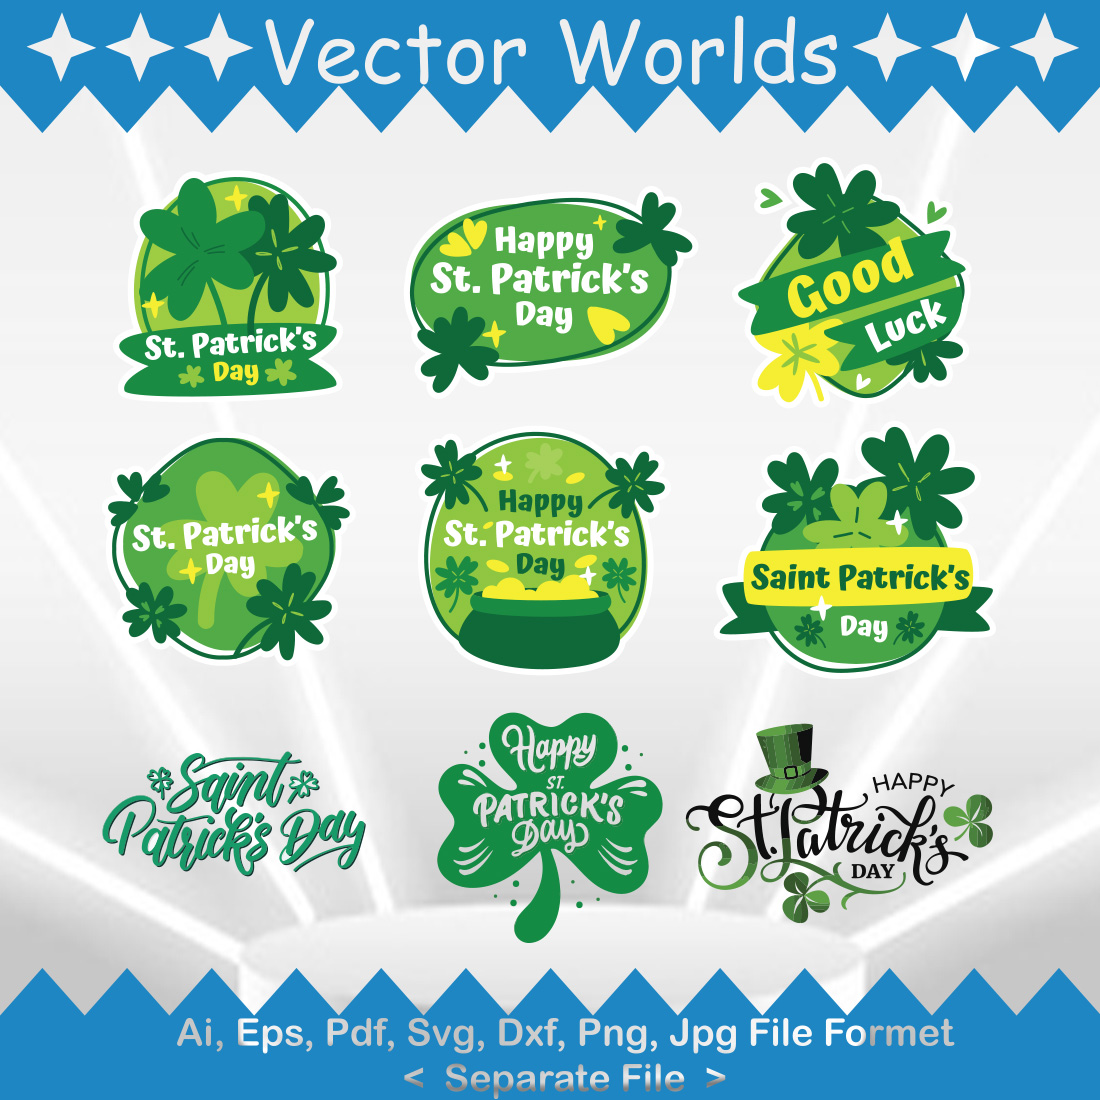 Happy St Patrick's Day SVG Vector Design cover image.